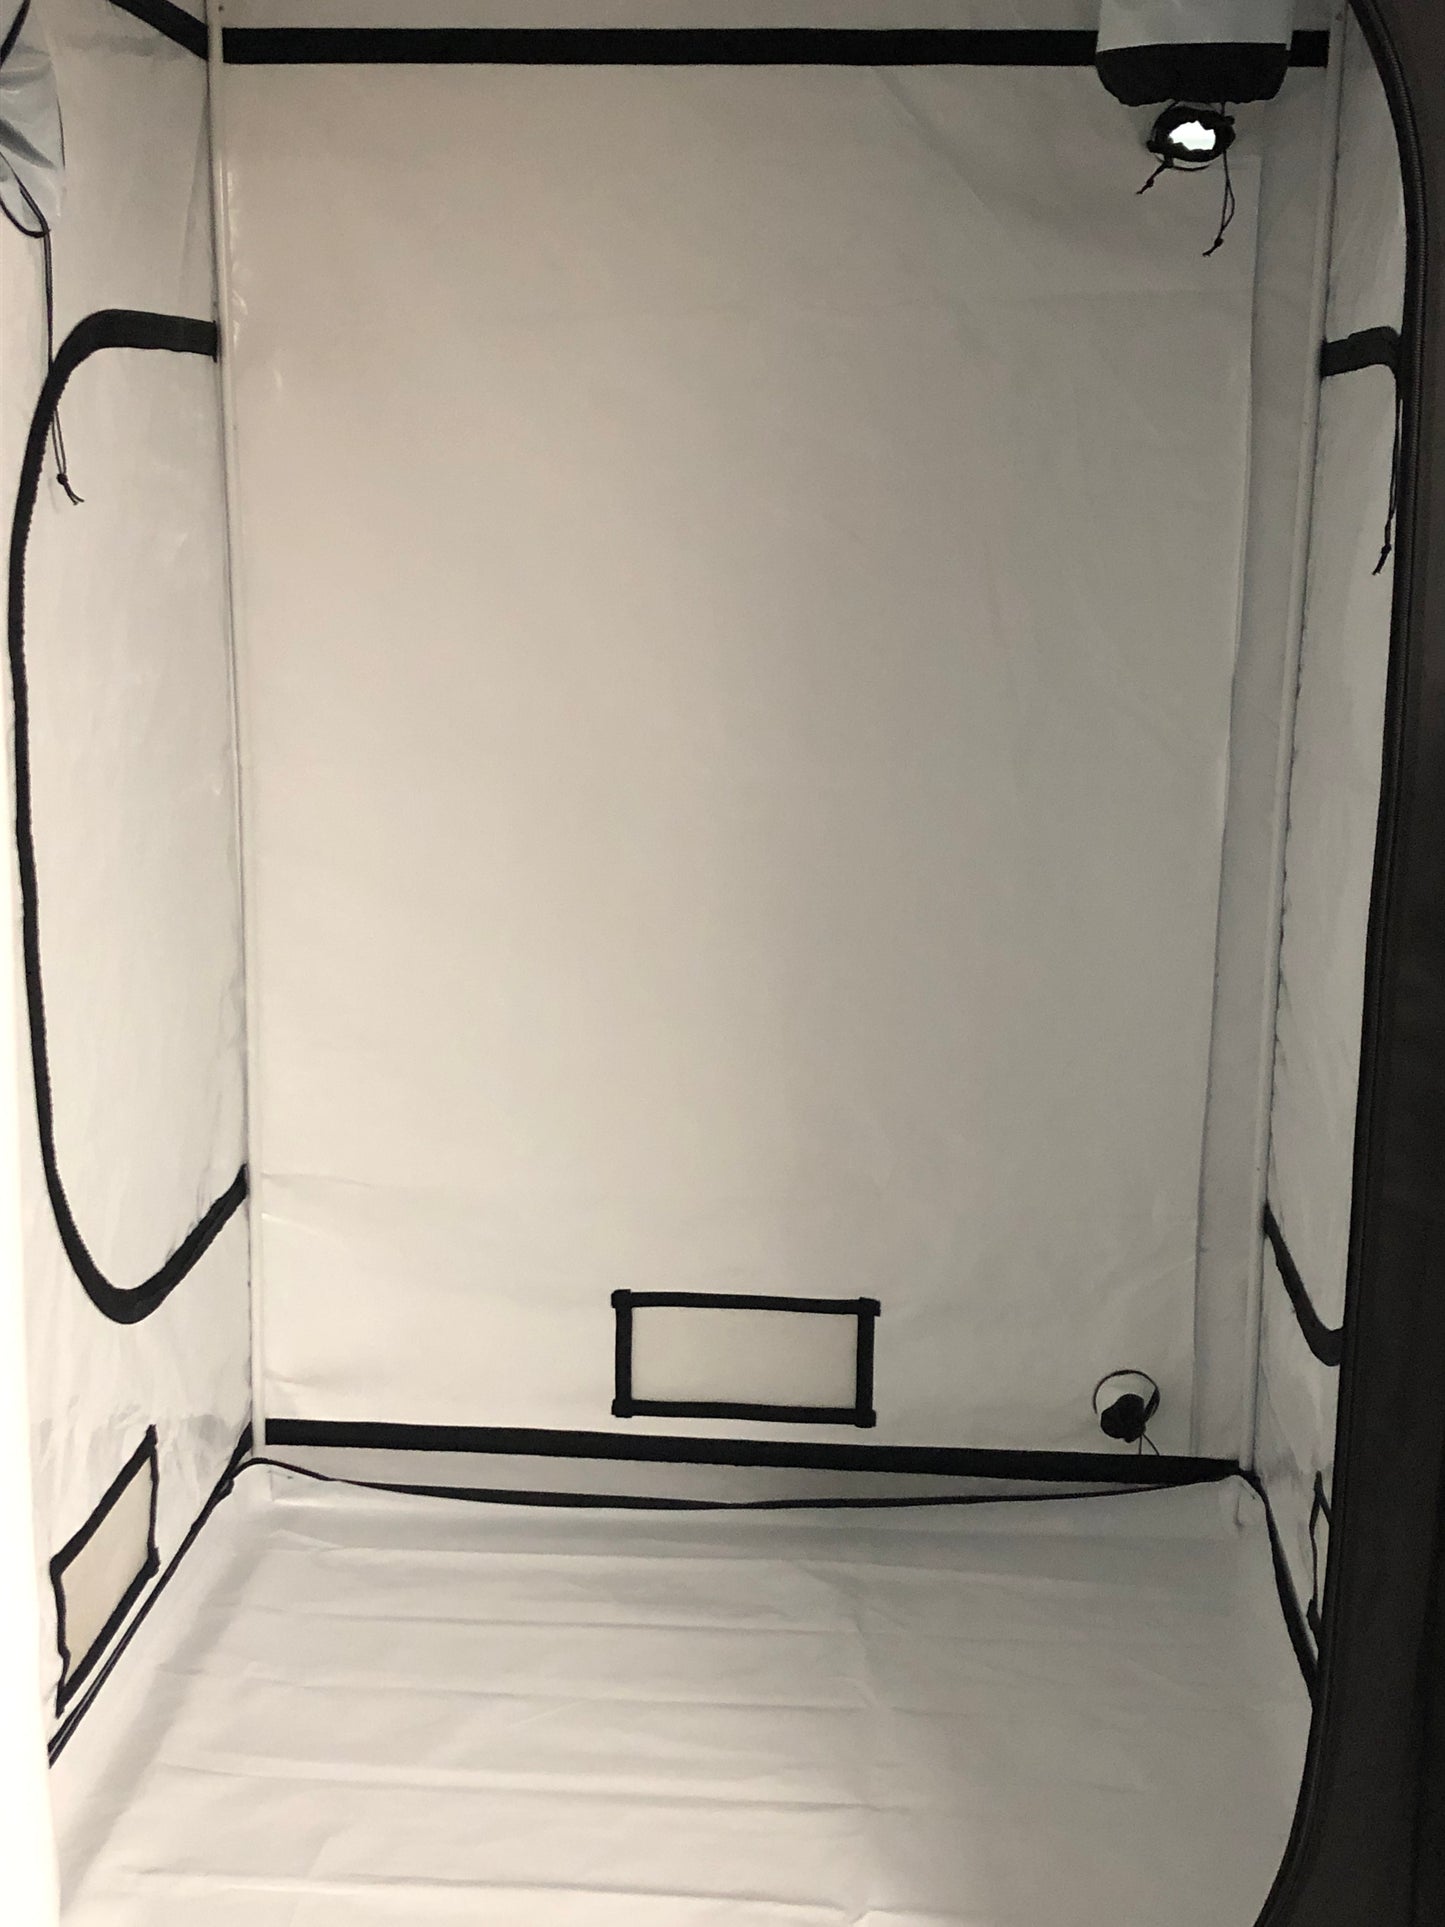 Grow Tent - 60" x 60" x 86" - 1680D Oxford Outer Fabric - WHITE POLY or MYLAR Liner - 19mm Steel Frame - Highly Reflective Inside - Heavy Duty Zippers - Premium Quality Inside & Out